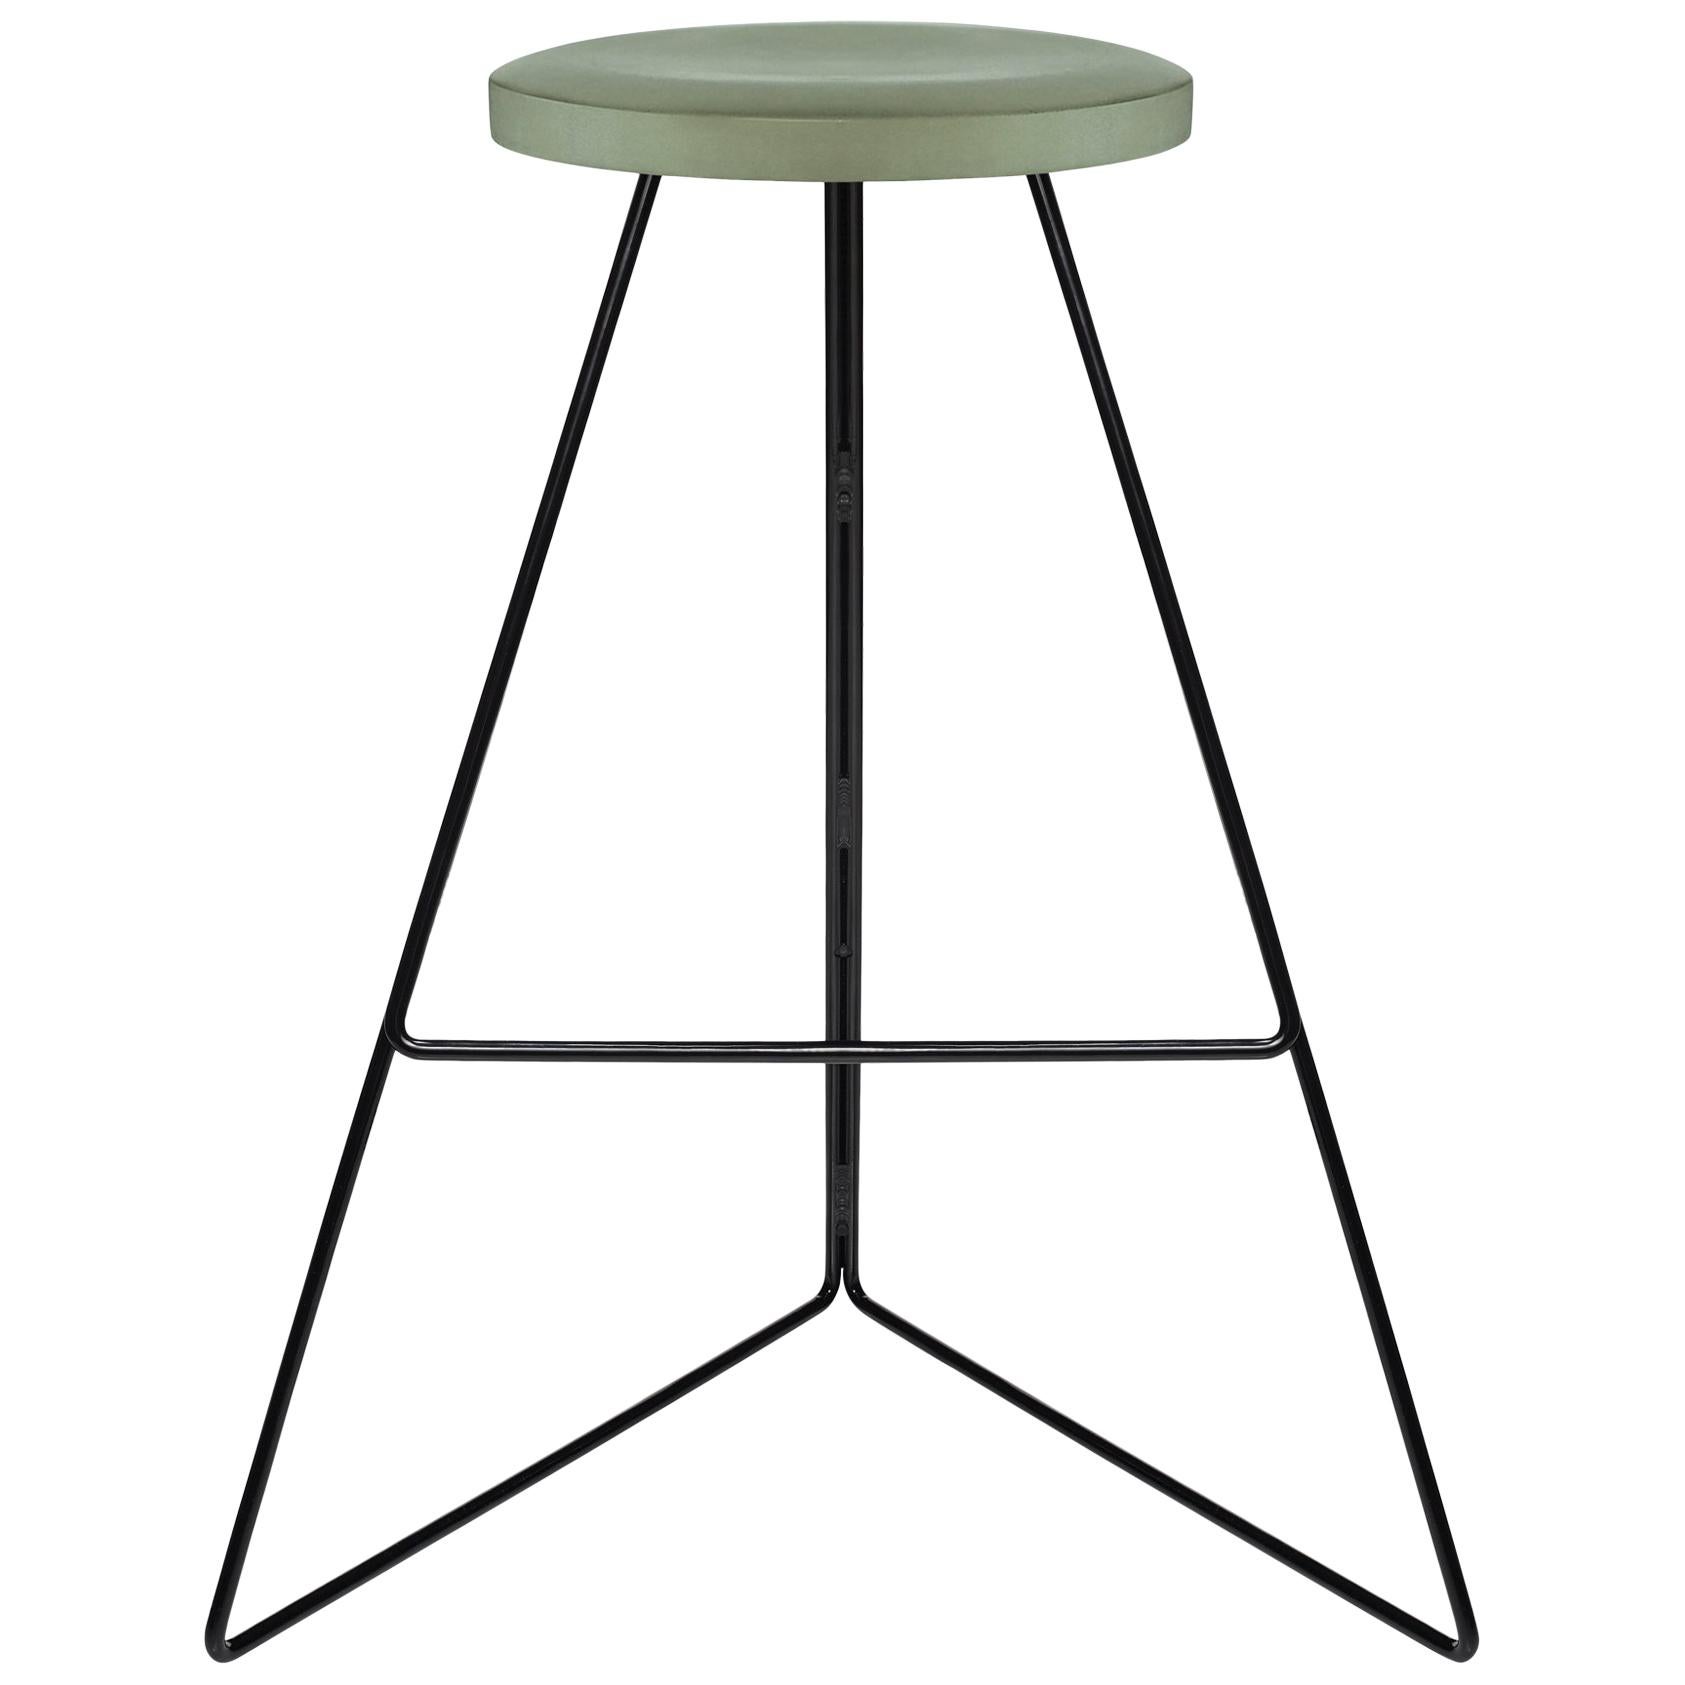 Coleman Stool - Aspen Concrete Seat and Black Steel Base, 24" Counter Height im Angebot